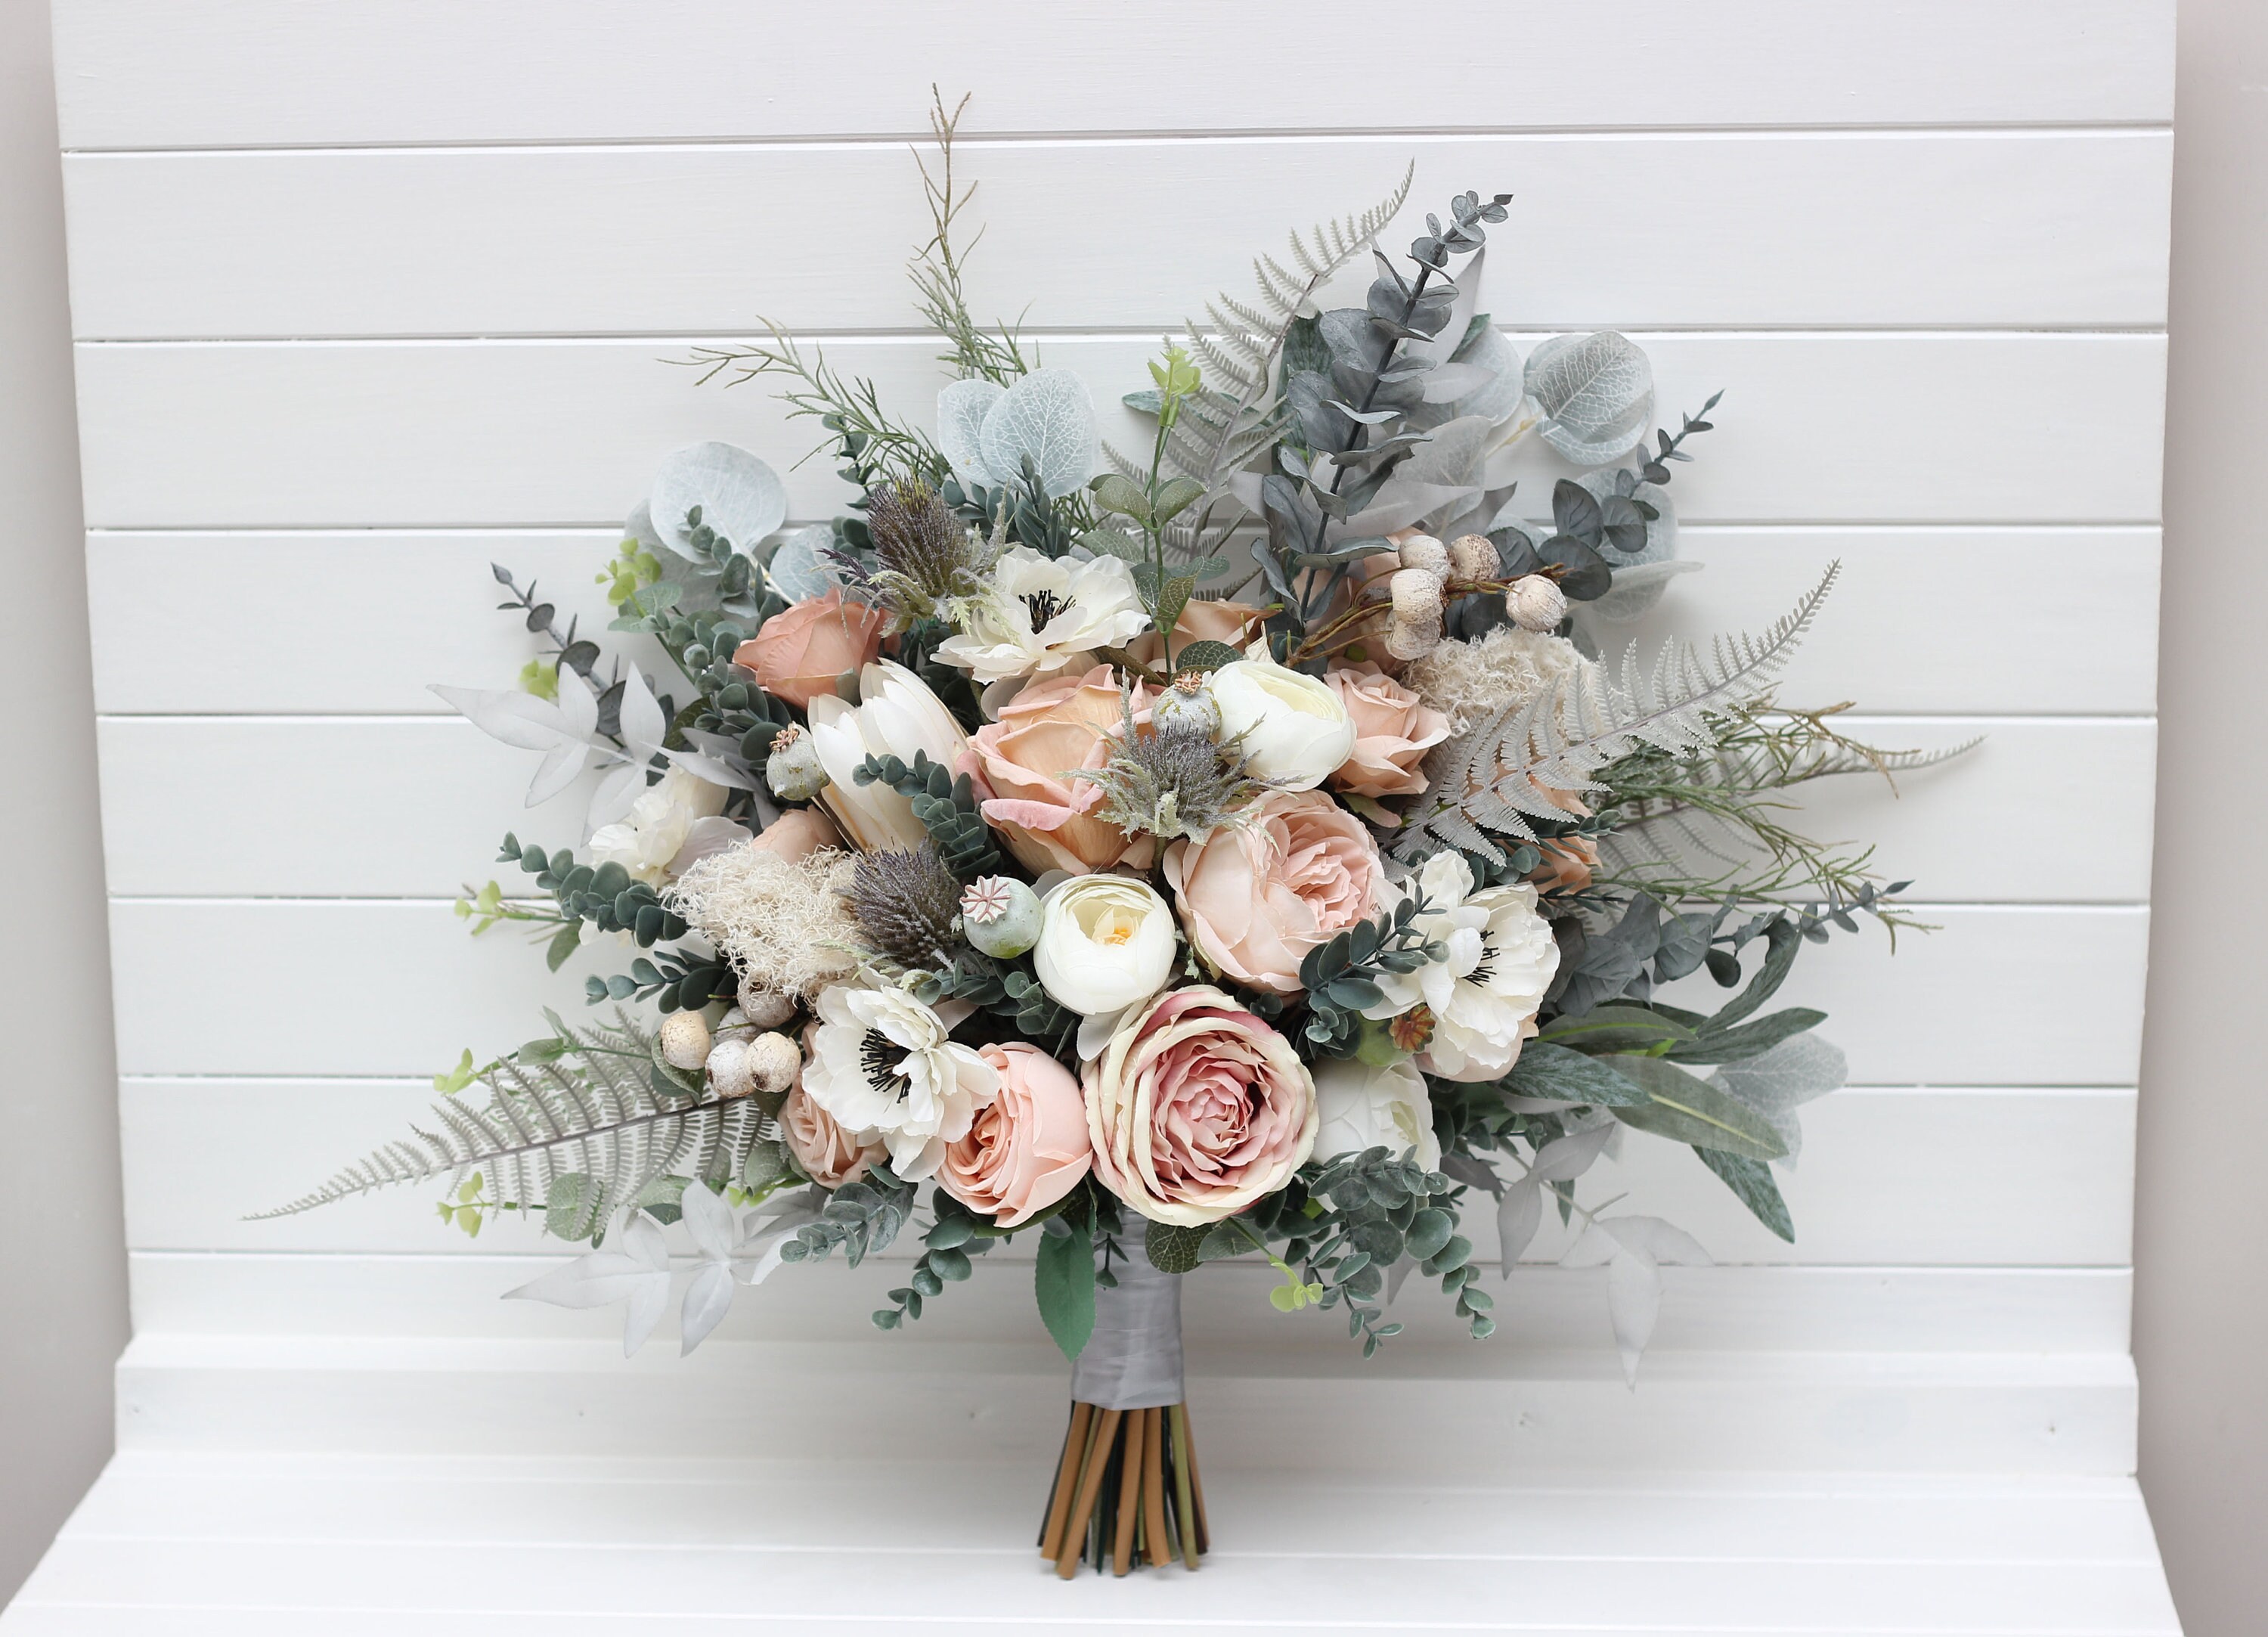 The Holiday Aisle Mixed Floral Arrangement, Beige